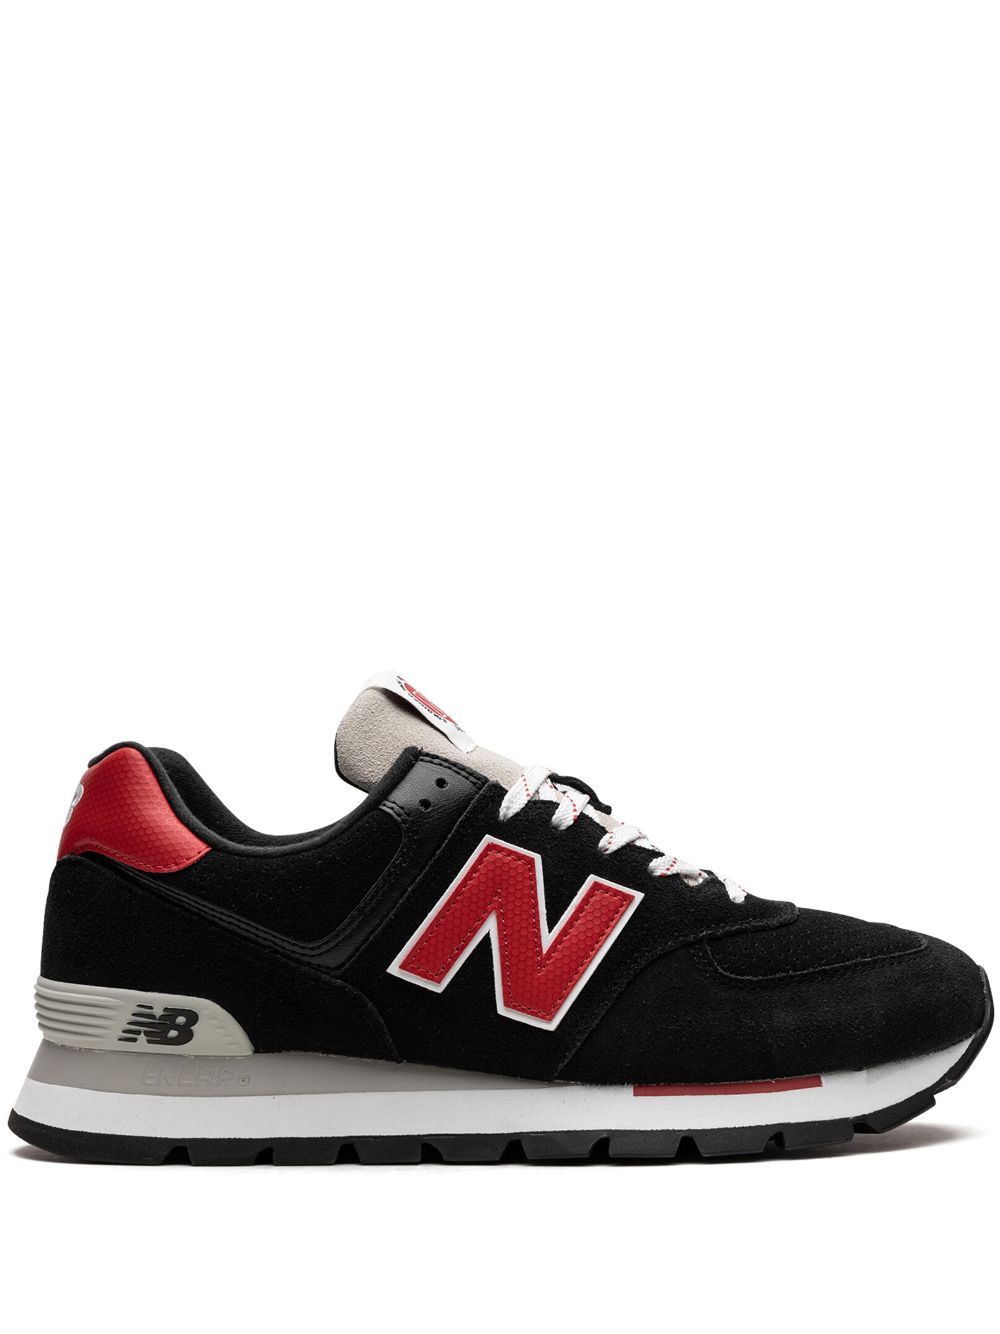 New Balance 574 "Black/Red" sneakers